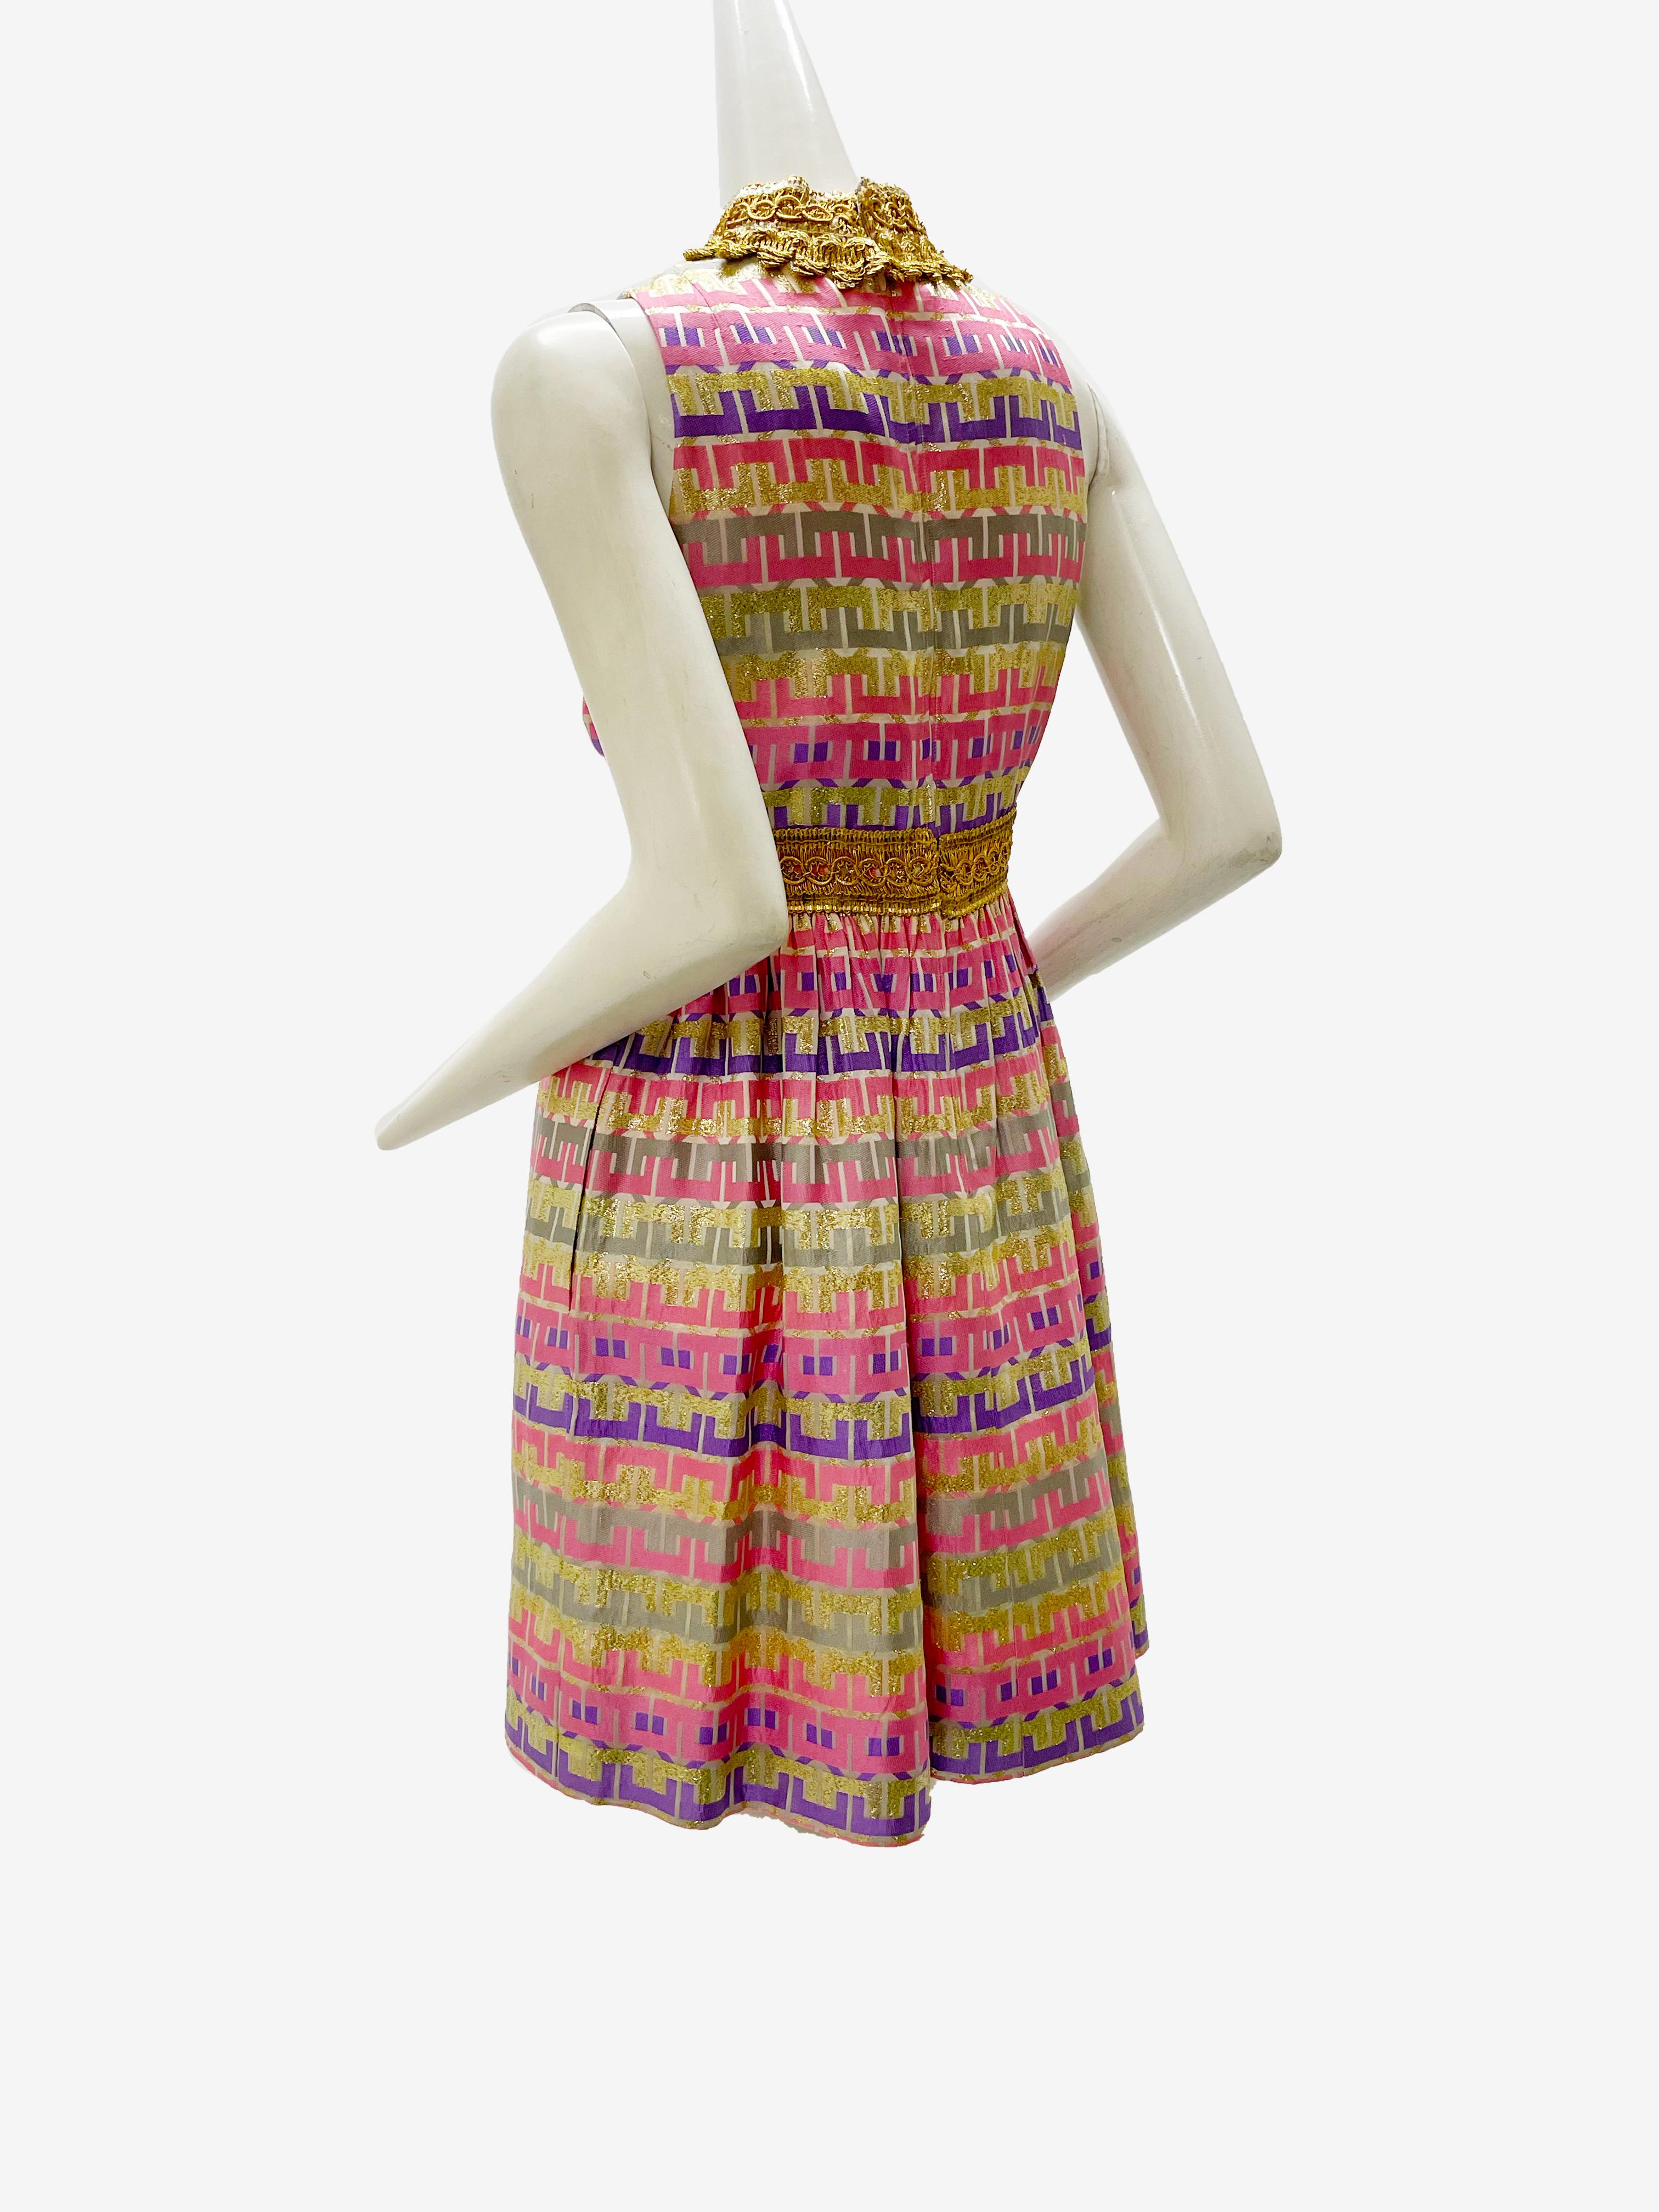 A beautiful 1960s Oscar de La Renta Mod striped brocade mini dress in pastel pinks, purples and gold. Heavy gold braidwork at neckline and Empire waist. New zipper. Fits a modern US size 4-6. See Measurement card for exact fit.